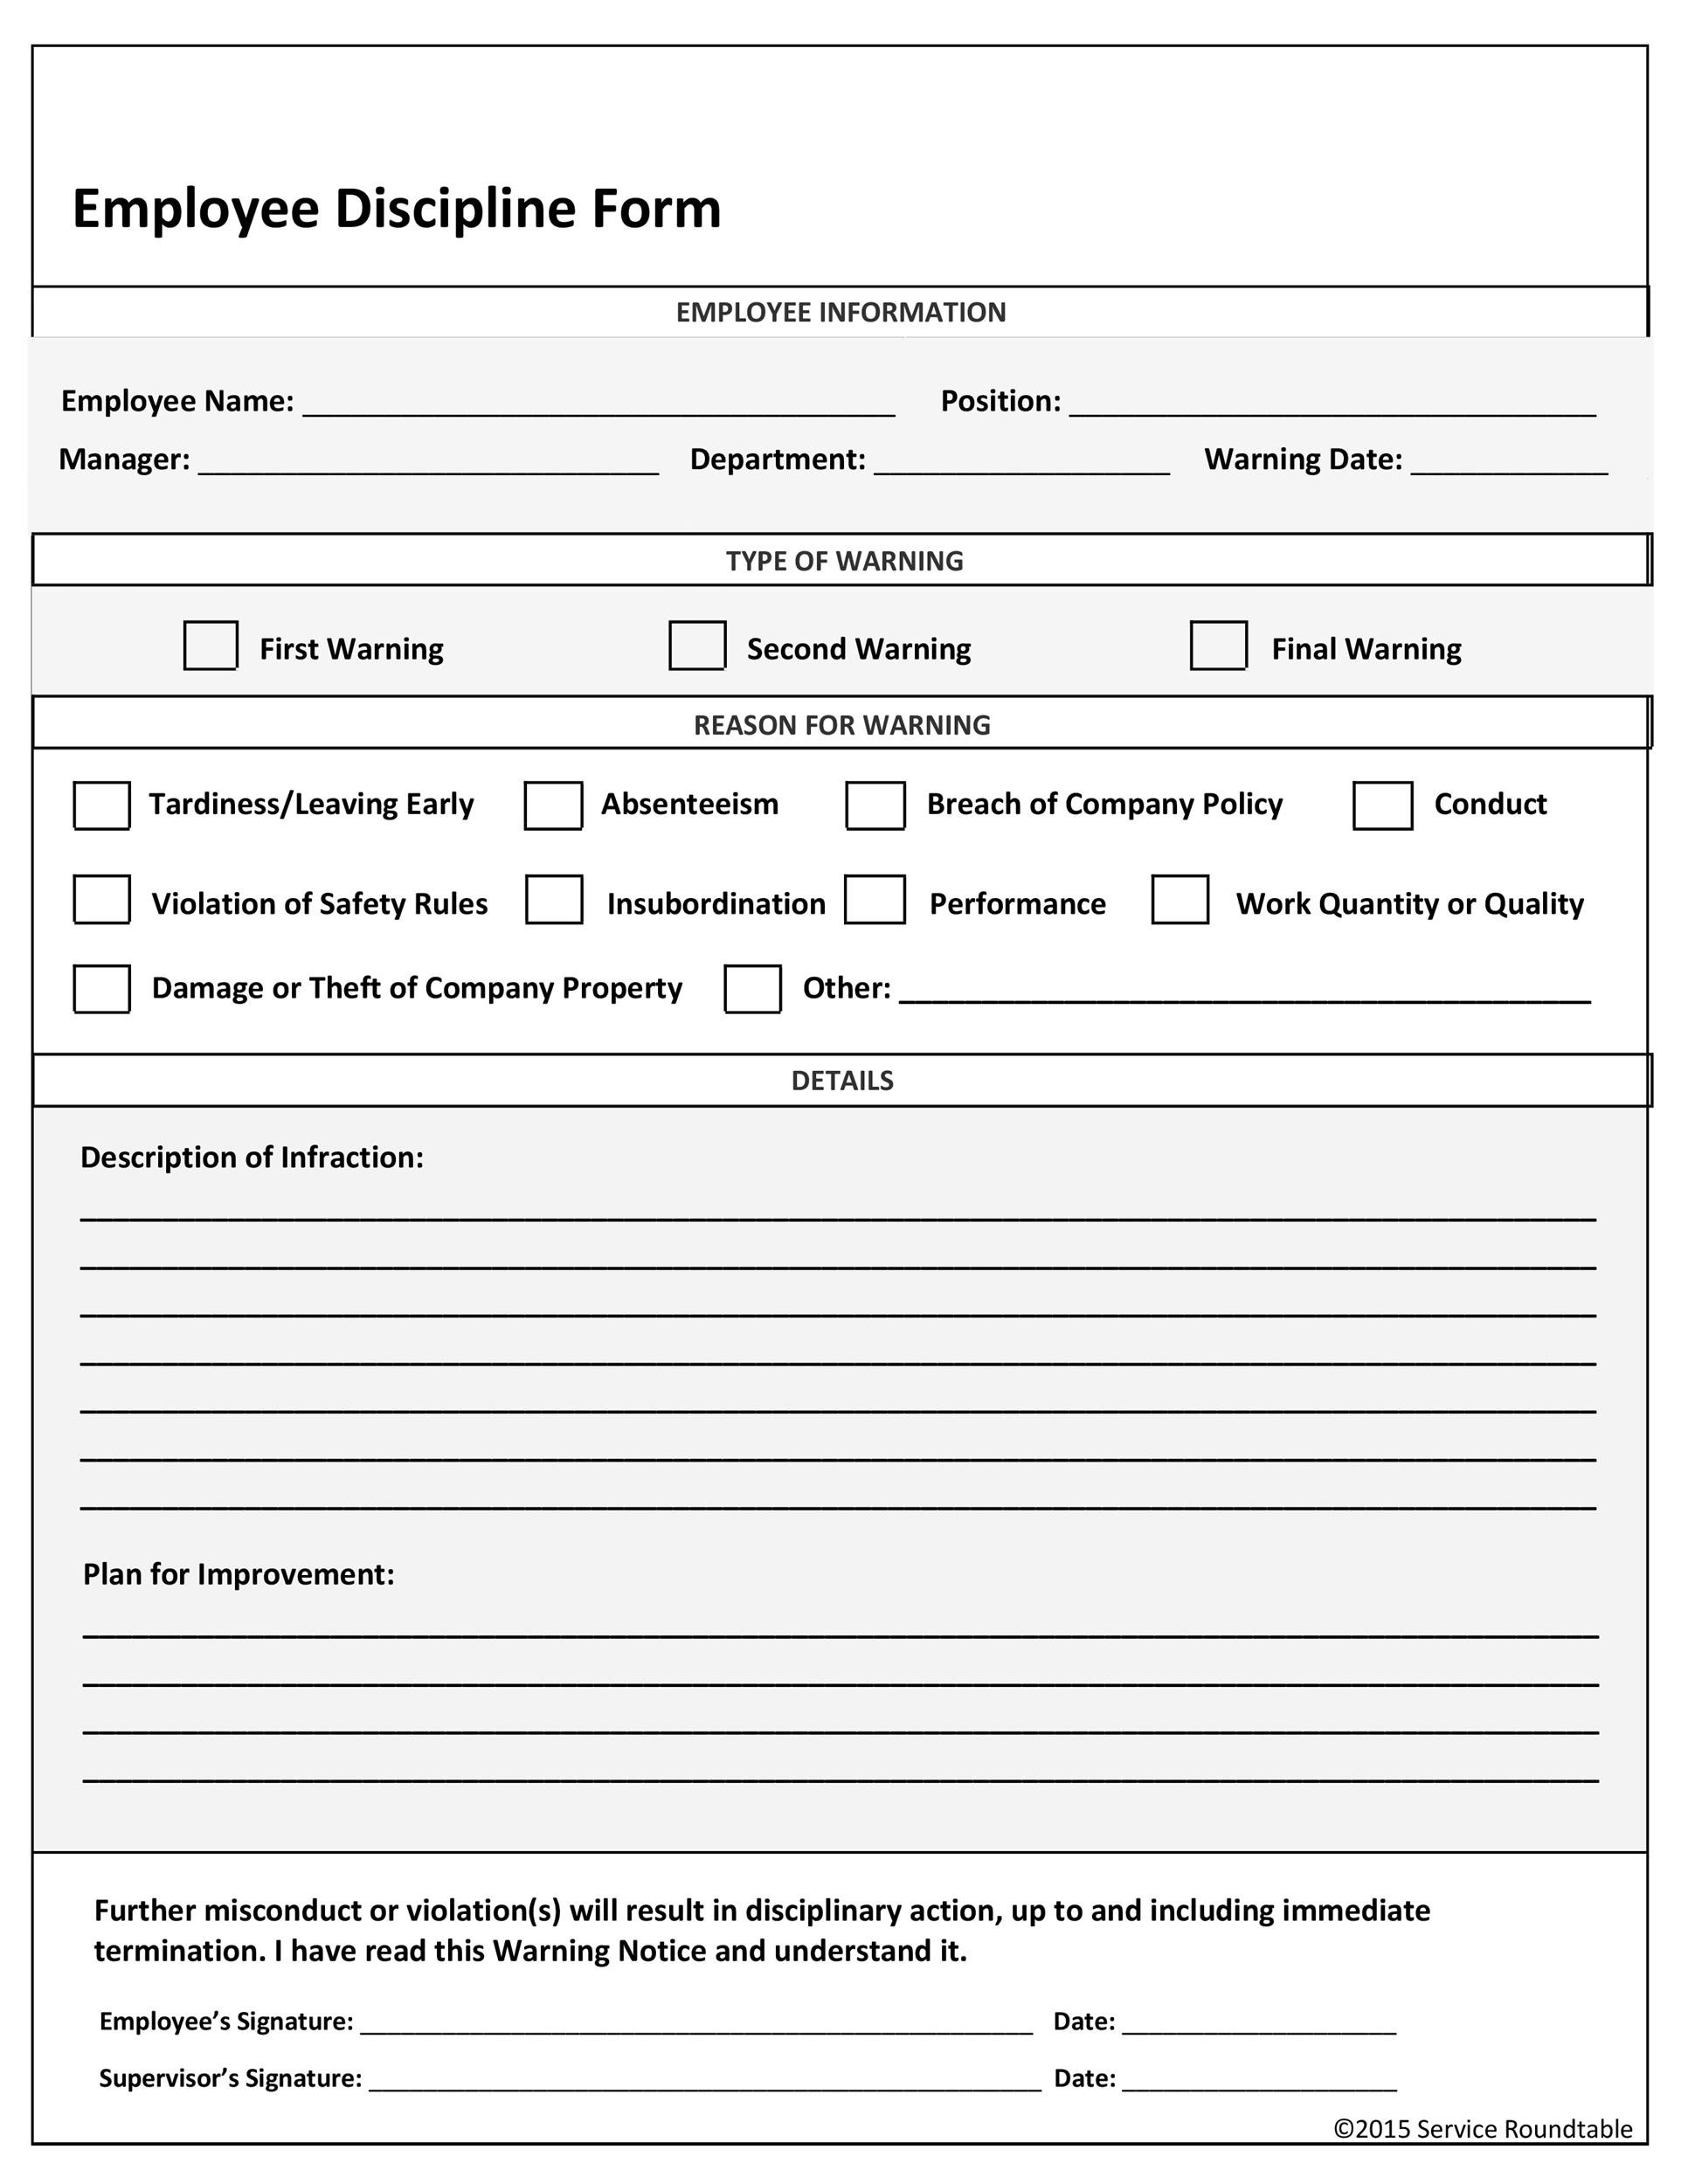 40-employee-disciplinary-action-forms-templatelab